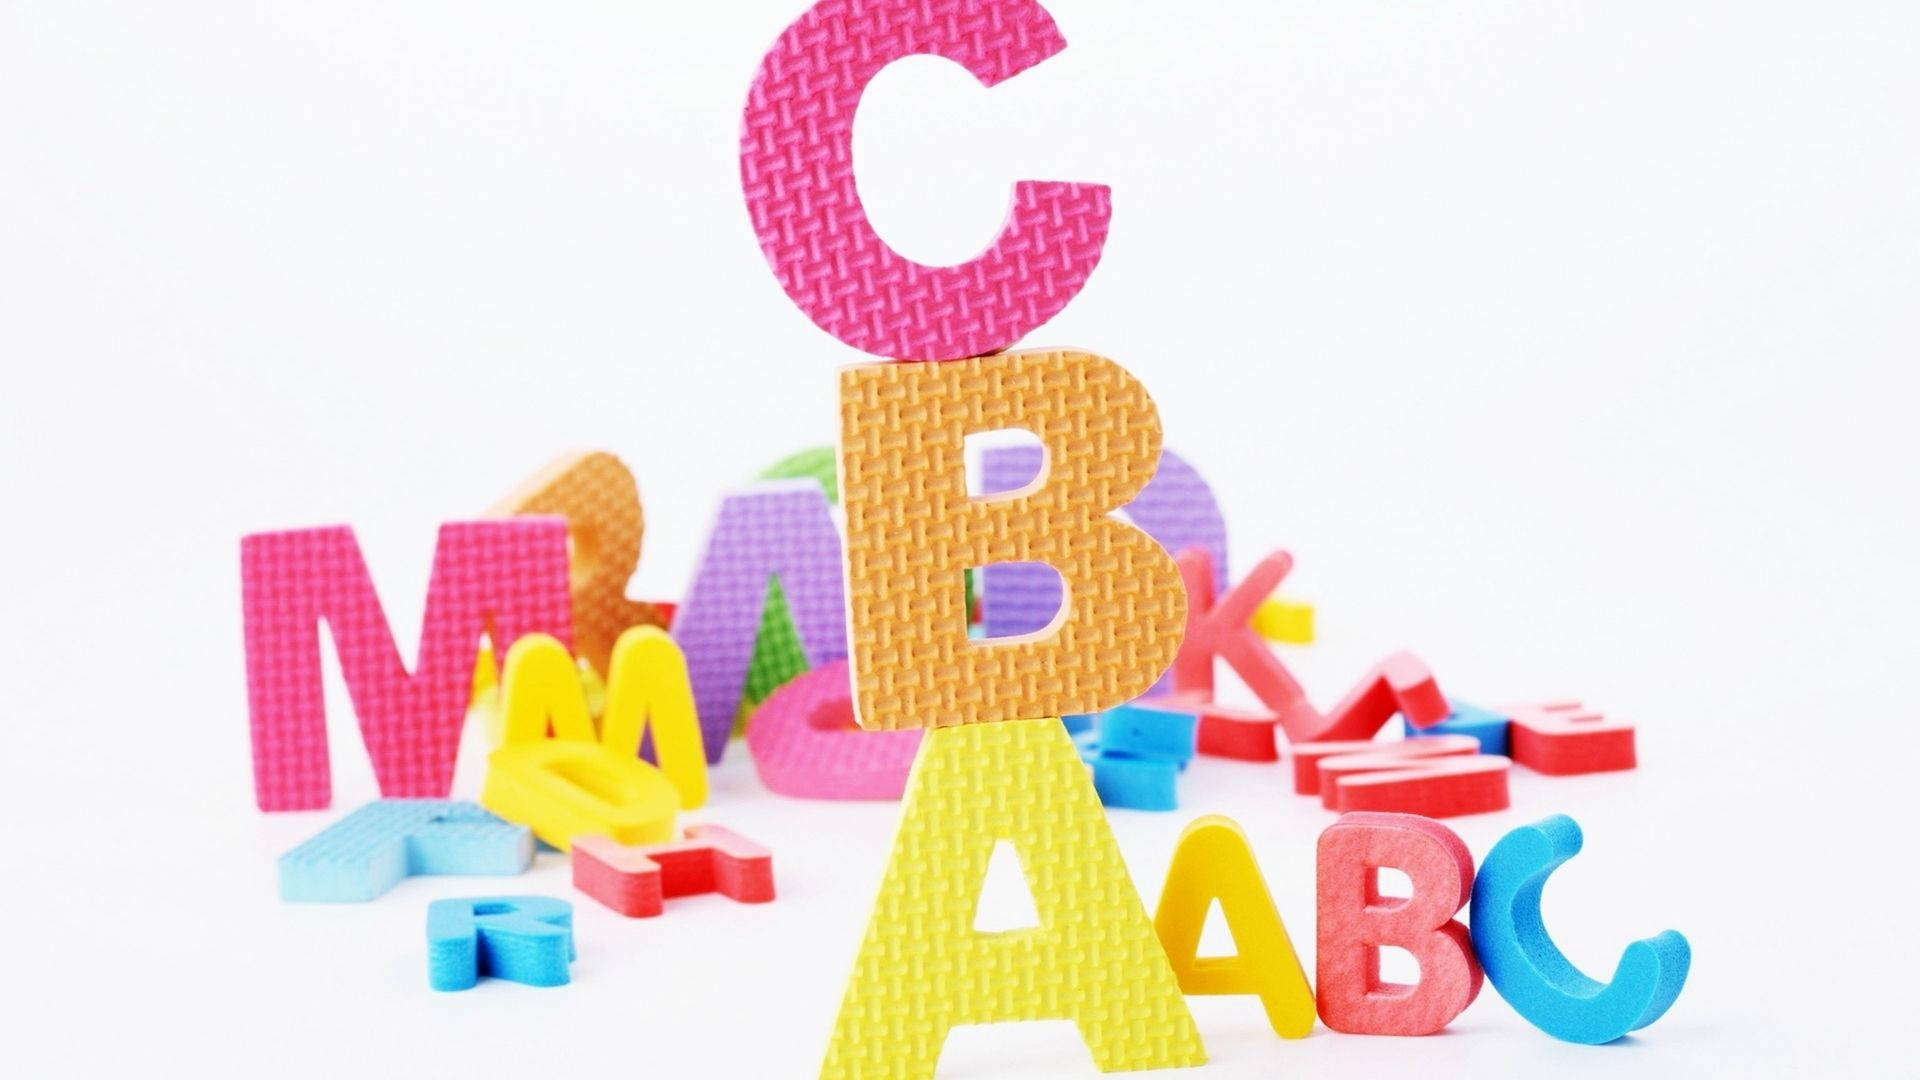 Stacked Rubber Alphabets